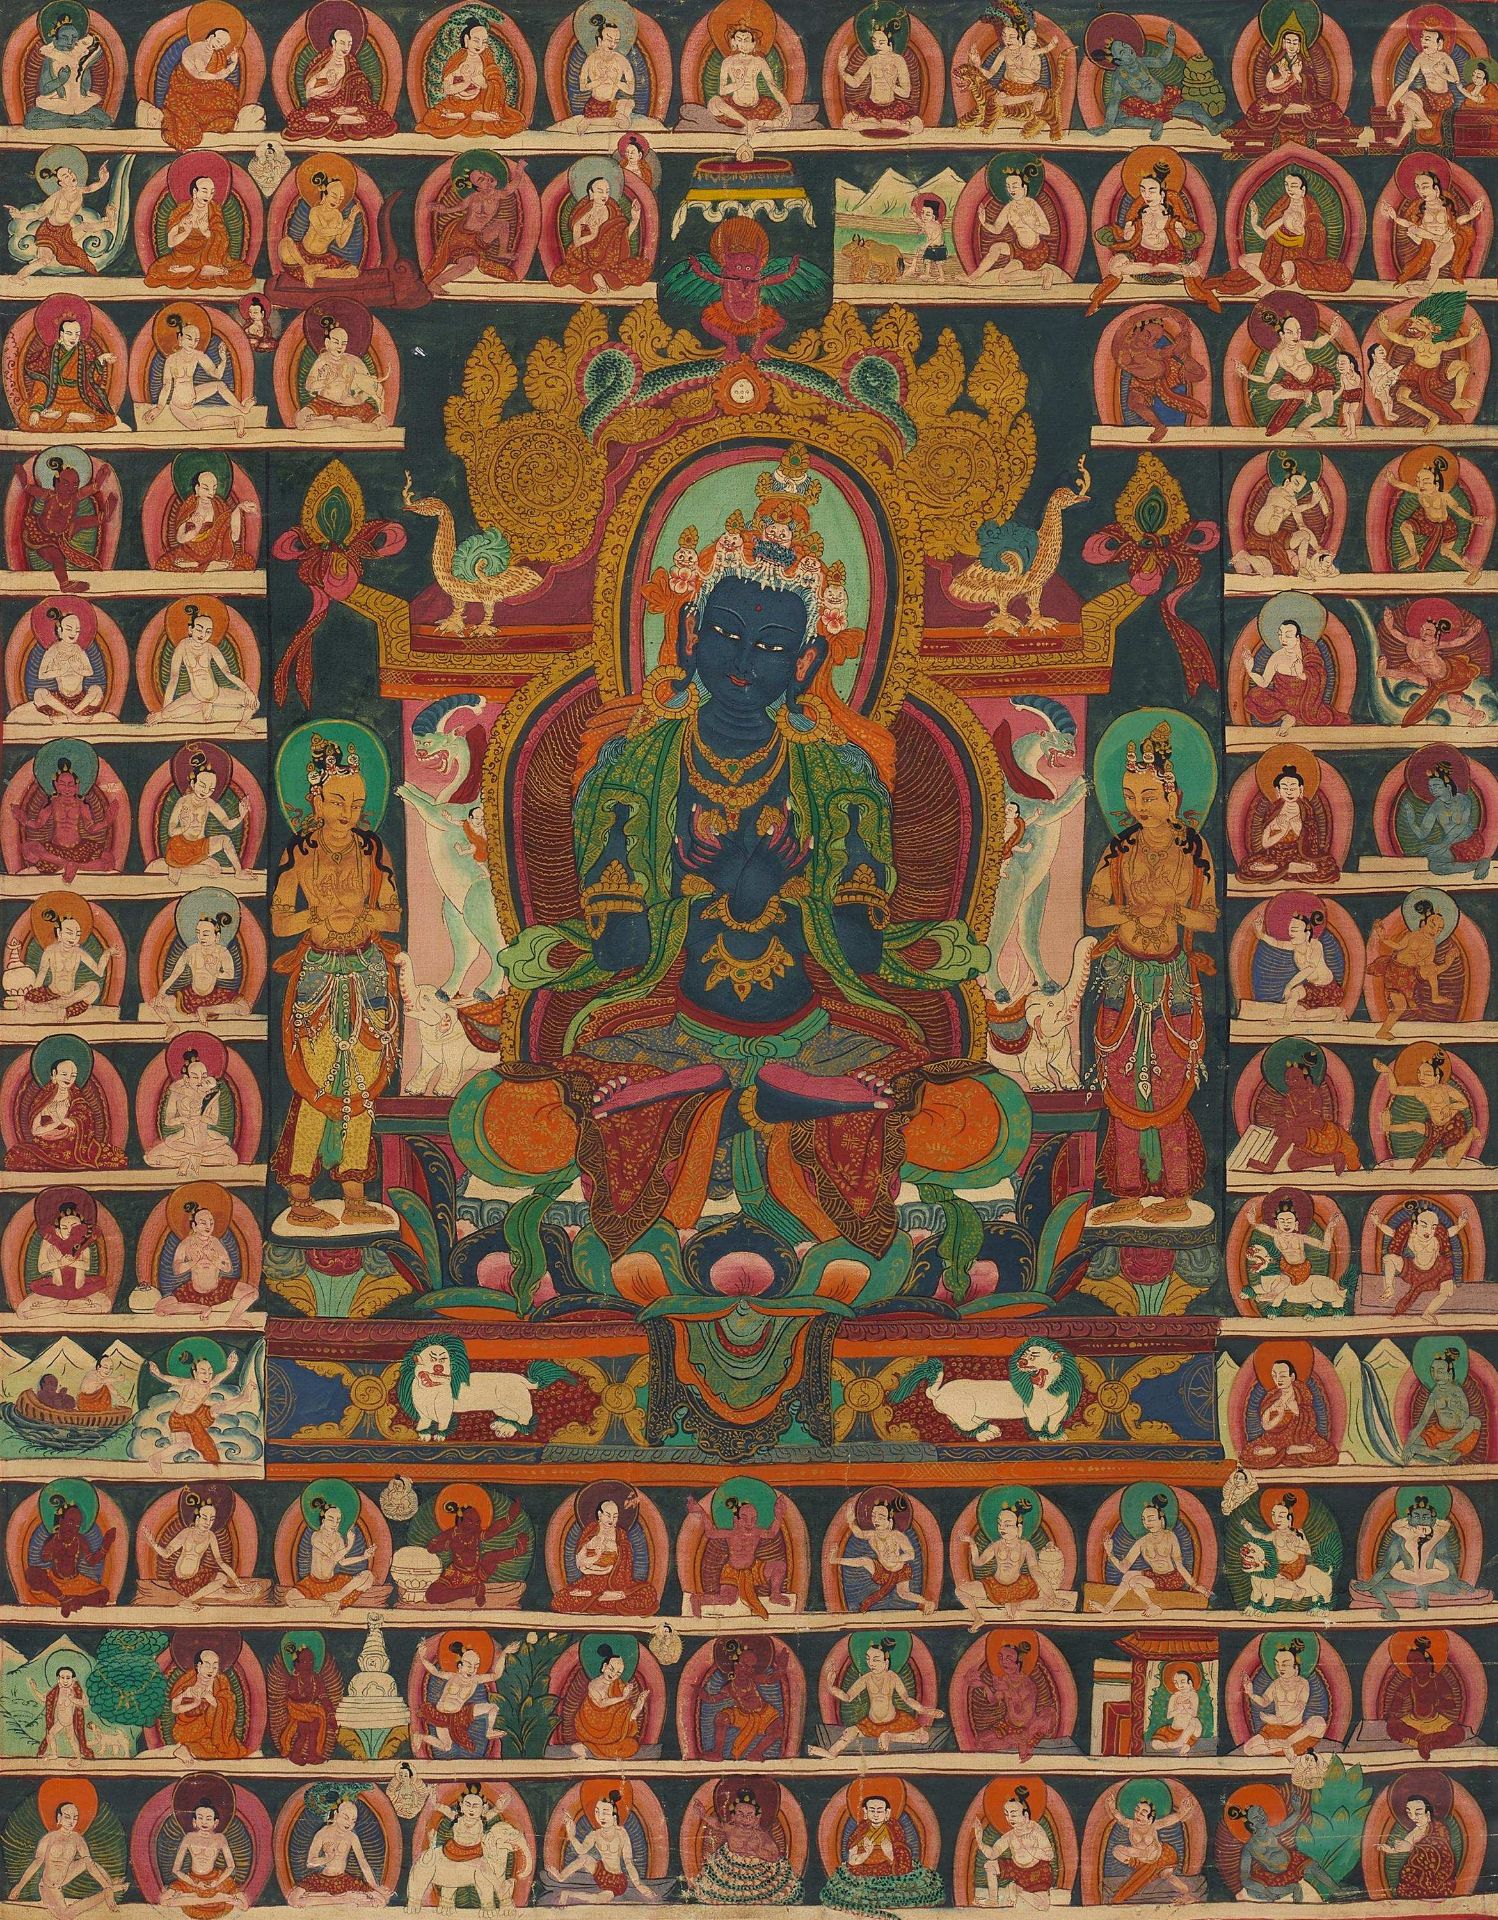 THANGKA WITH BUDDHA VAJRADHARA. Nepal. First half 20th c. Color and gold on fabric, unmounted. The